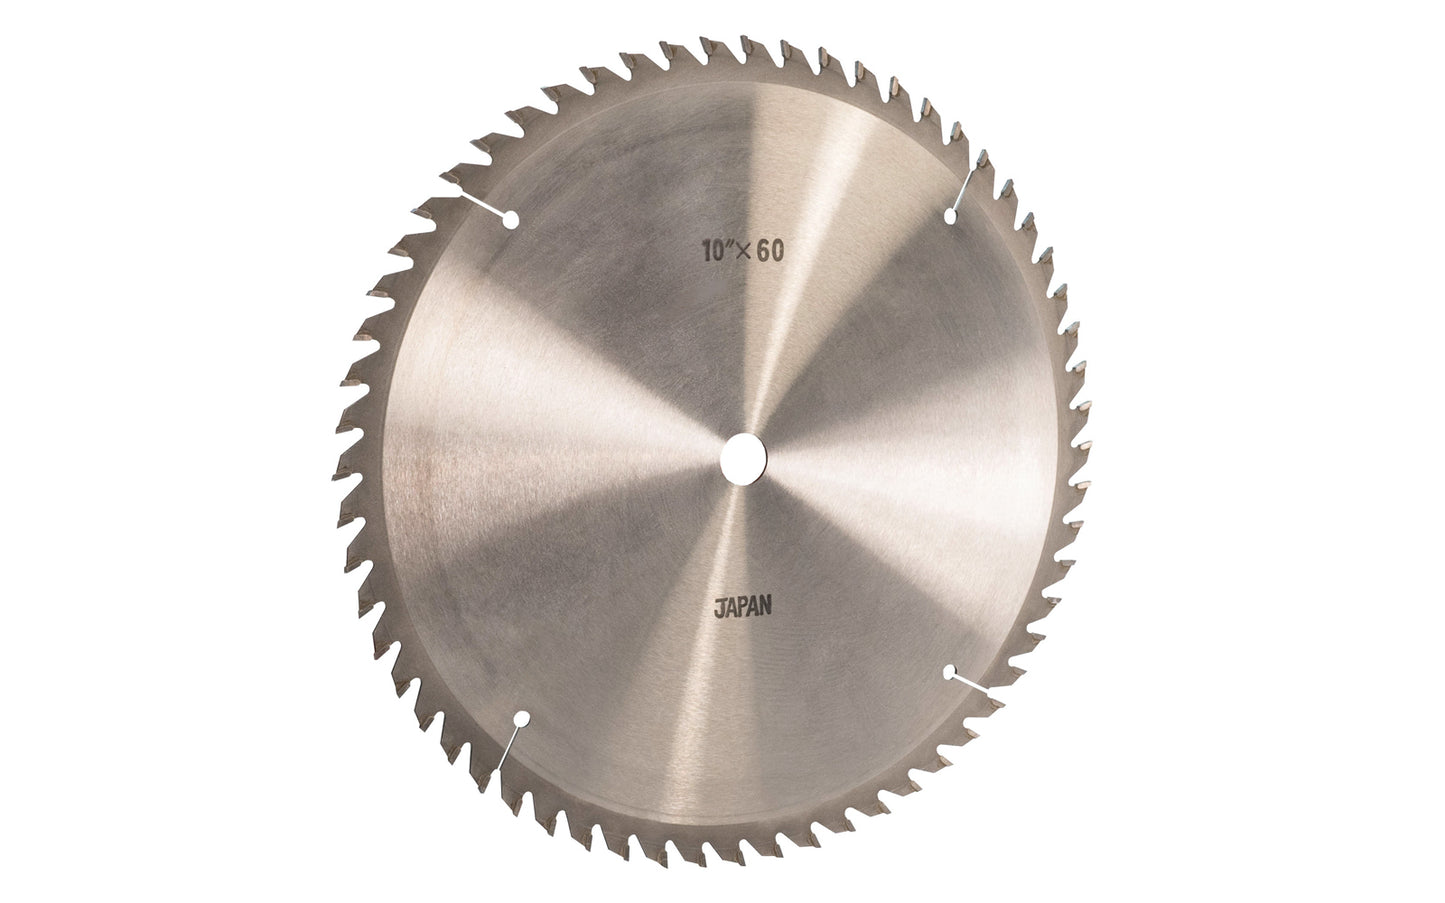 Japanese 10" thin kerf circular saw blade with carbide teeth made by Sanwa. 60 tooth saw blade for woodworking. Grind: ATB saw blade - Alternate Tooth Bevel style. 0.09" thin kerf. Sanwa model SB 1060. Made in Japan.